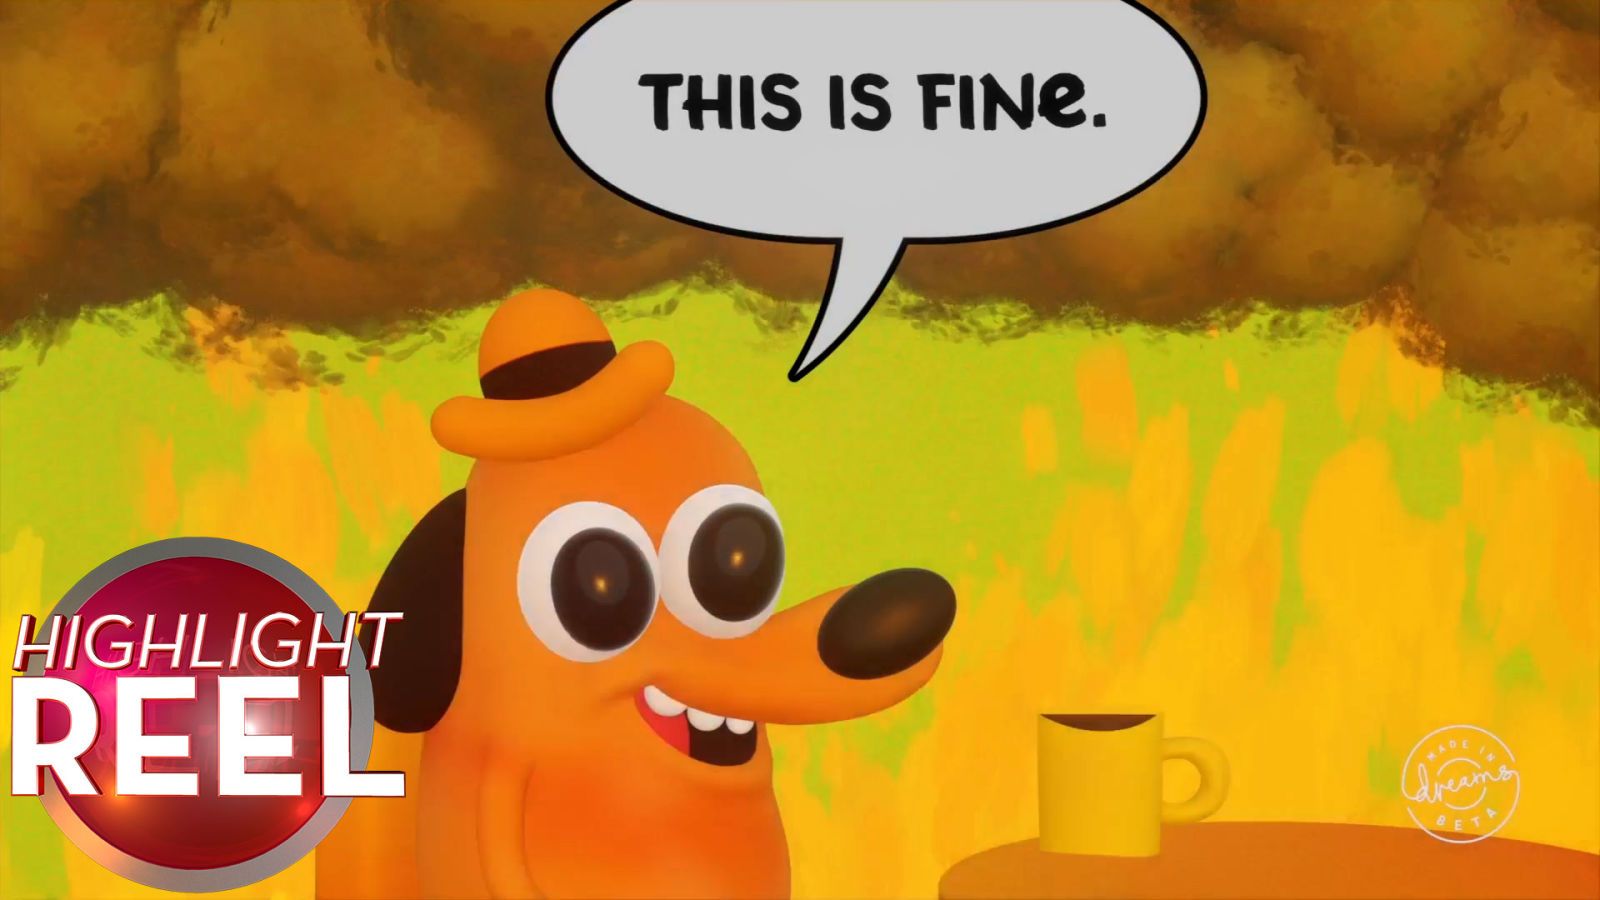 This is fine  by Anvesh Dunna on Dribbble